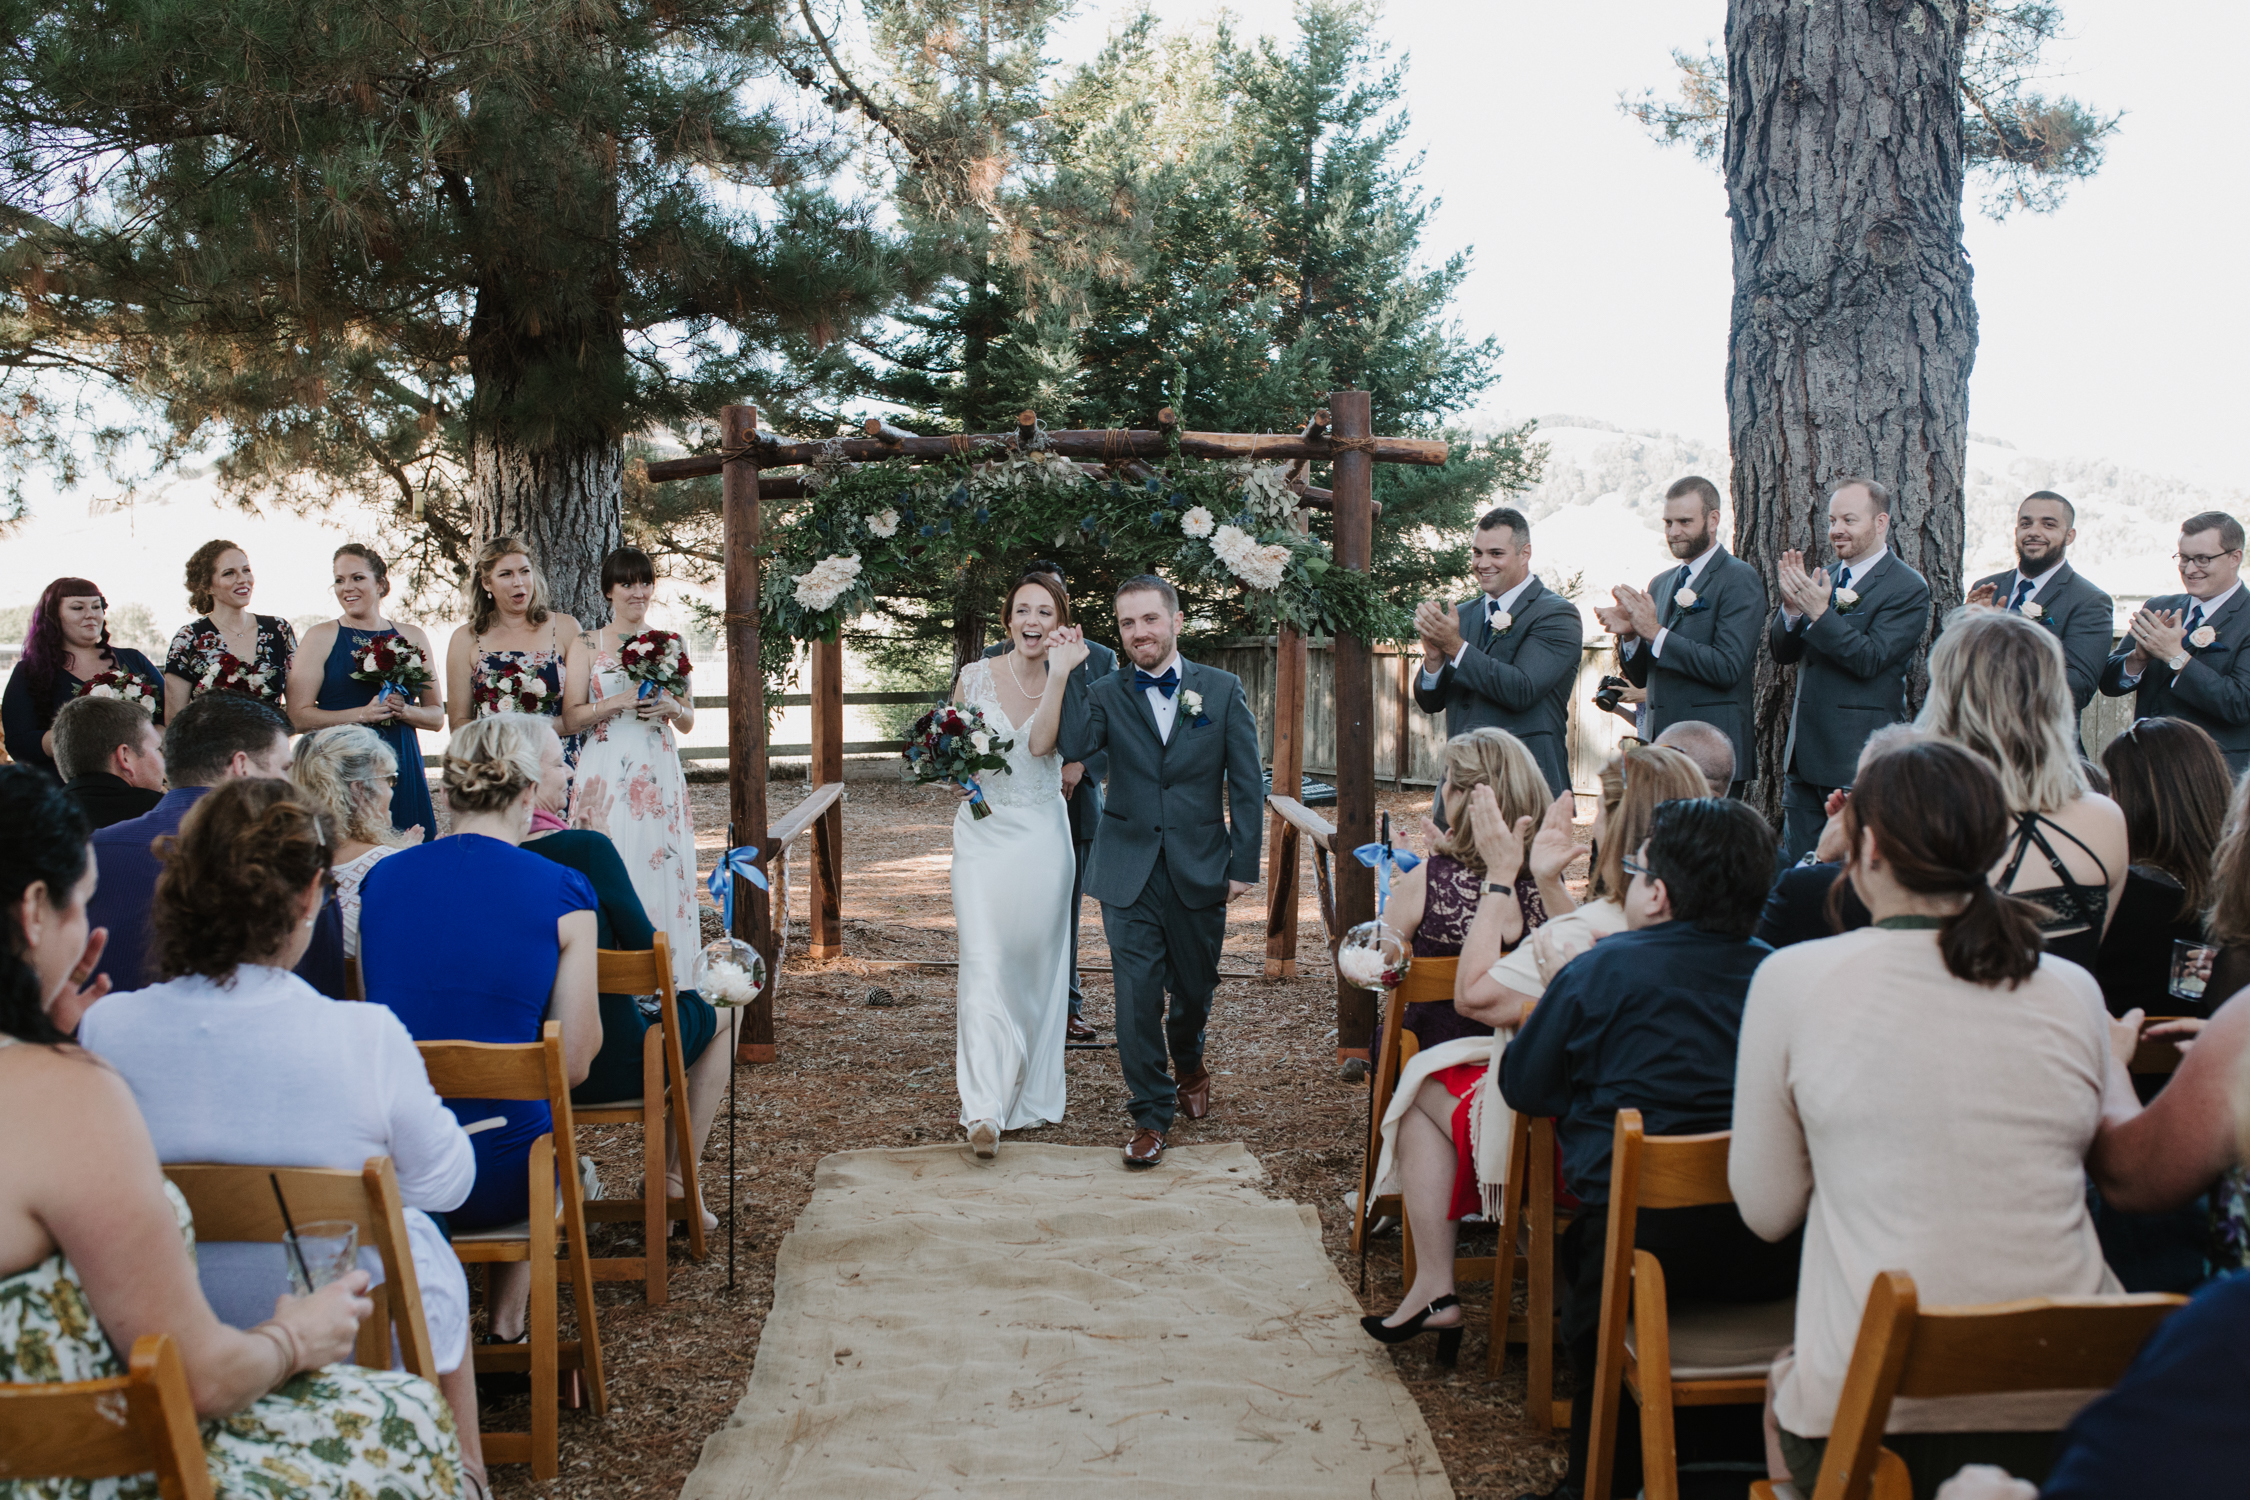 Rancho Nicasio Wedding Venue for Marin County Wedding Venues blog by amy thoimpson photography